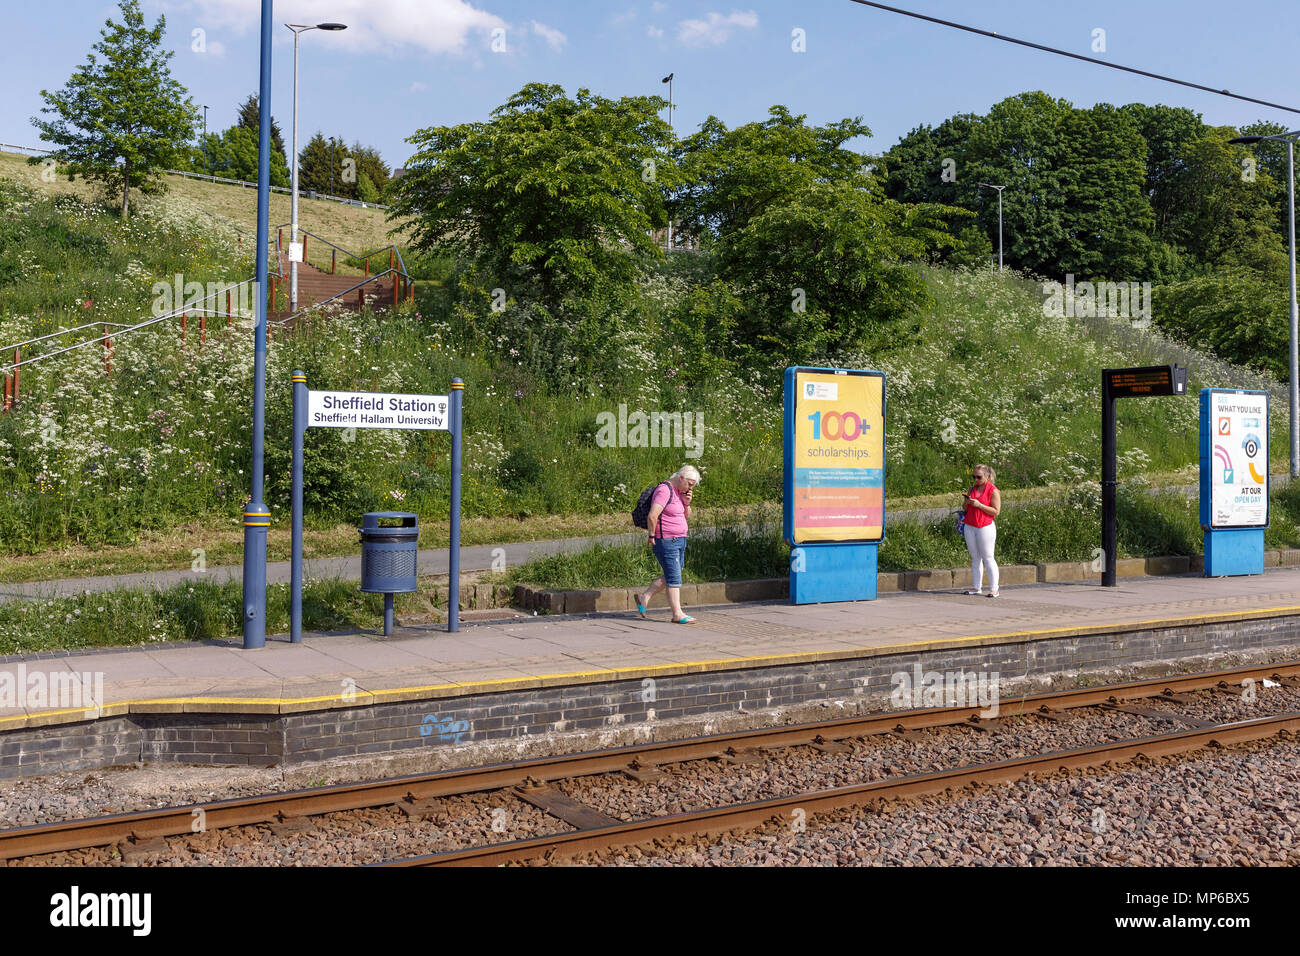 The tram stop at Sheffield railway station (called Sheffield Station, also for Sheffield Hallam University) Stock Photo